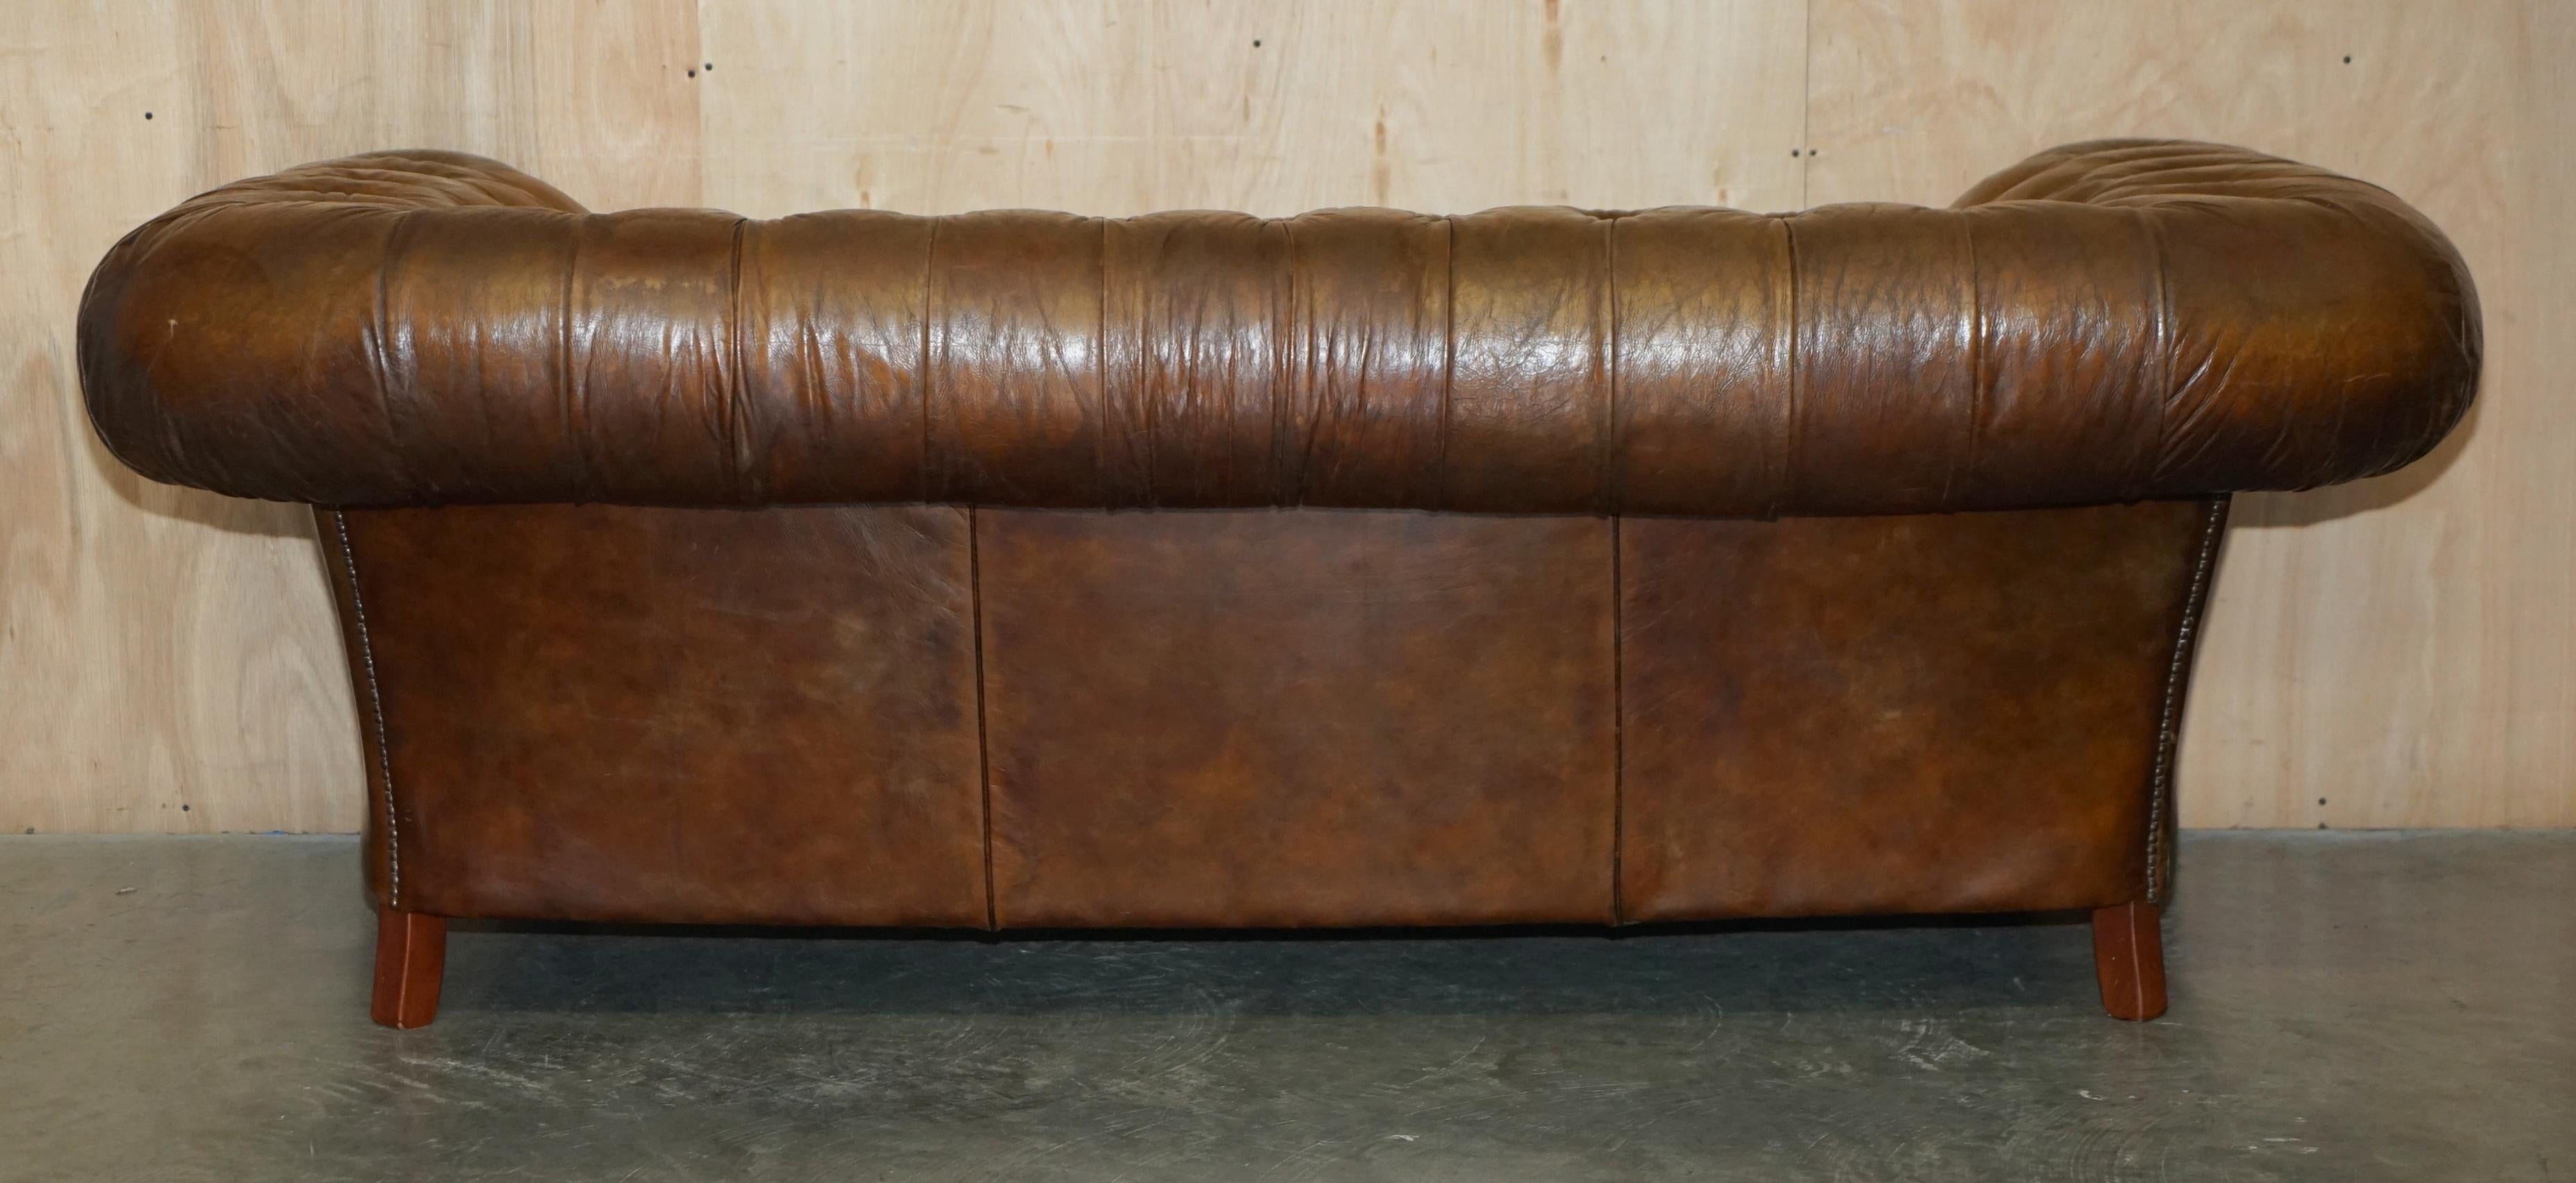 1 OF 2 TIMOTHY OULTON HERiTAGE BROWN VINTAGE LEATHER CHESTERFIELD HALO SOFAS For Sale 12